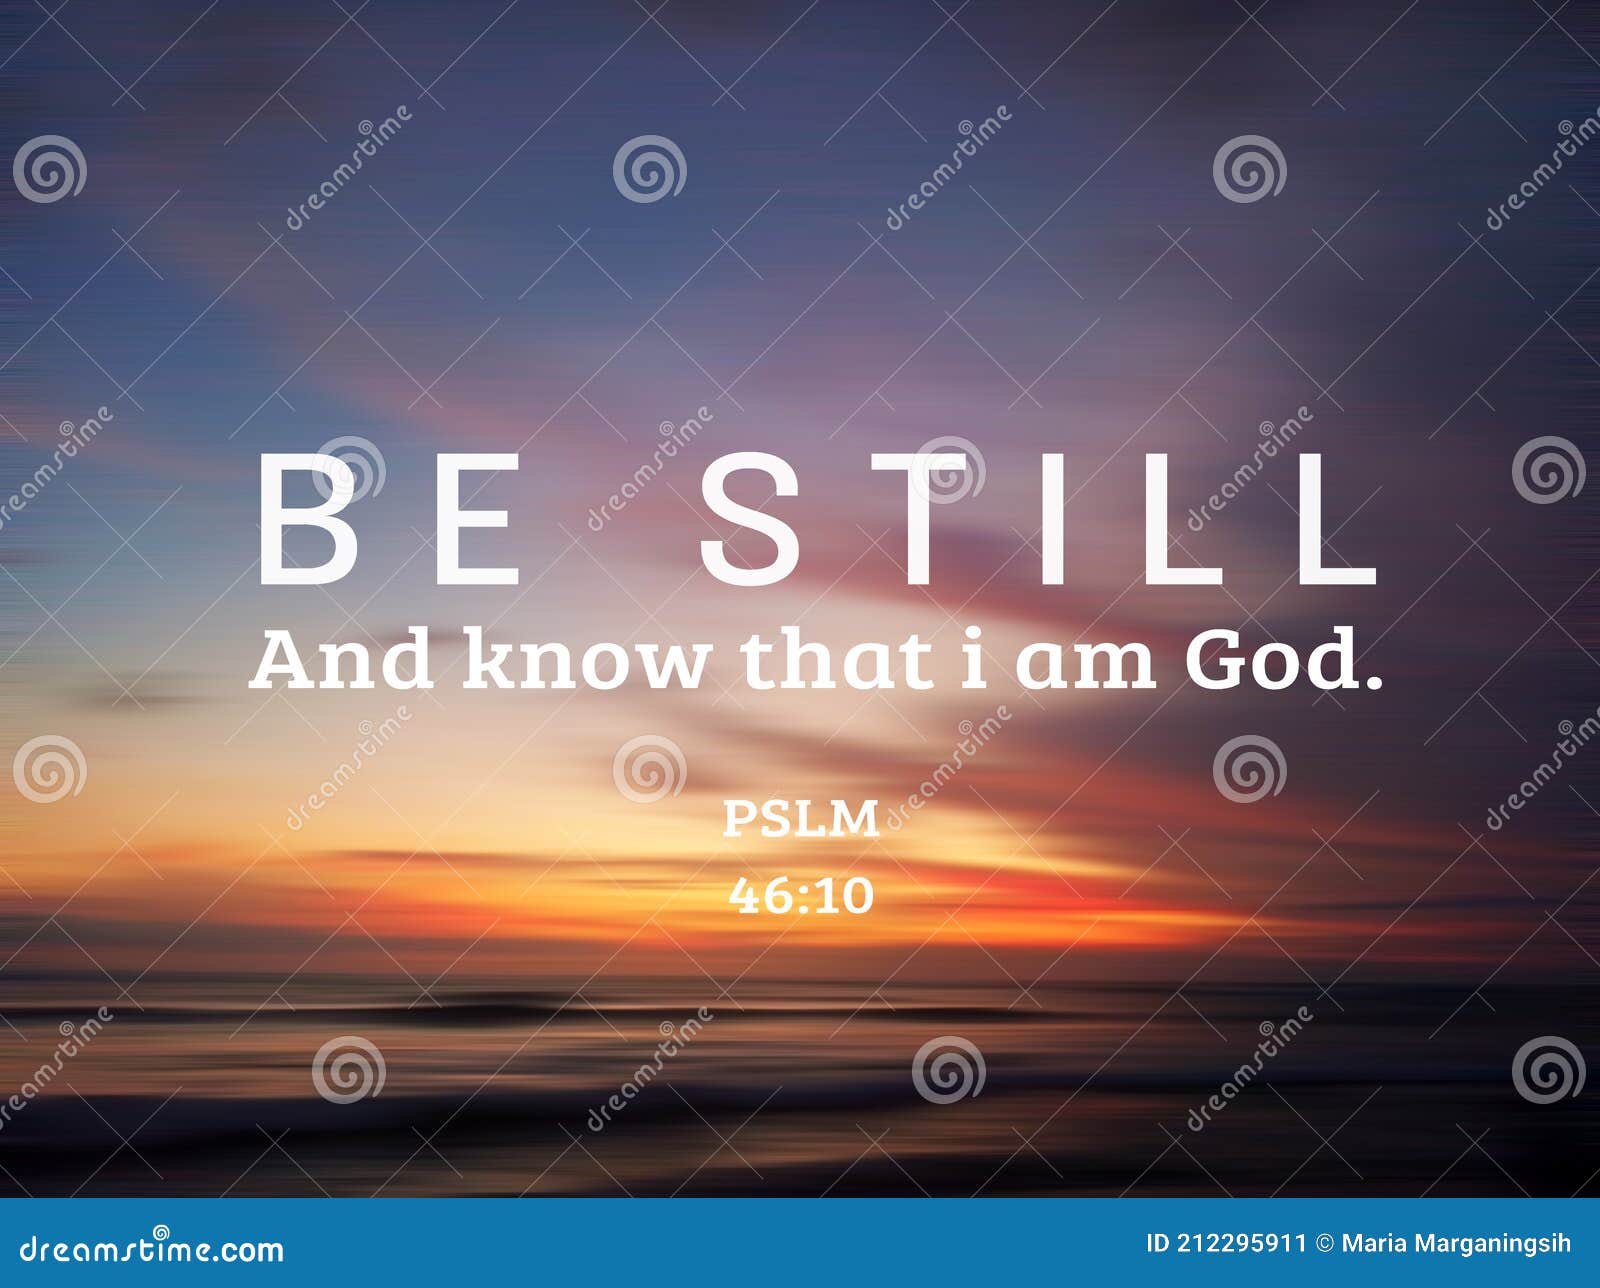 `be still. and know that i am god.` bible verse psalm 46:10 on colorful sunset sunrise sky clouds background over the sea horizon.